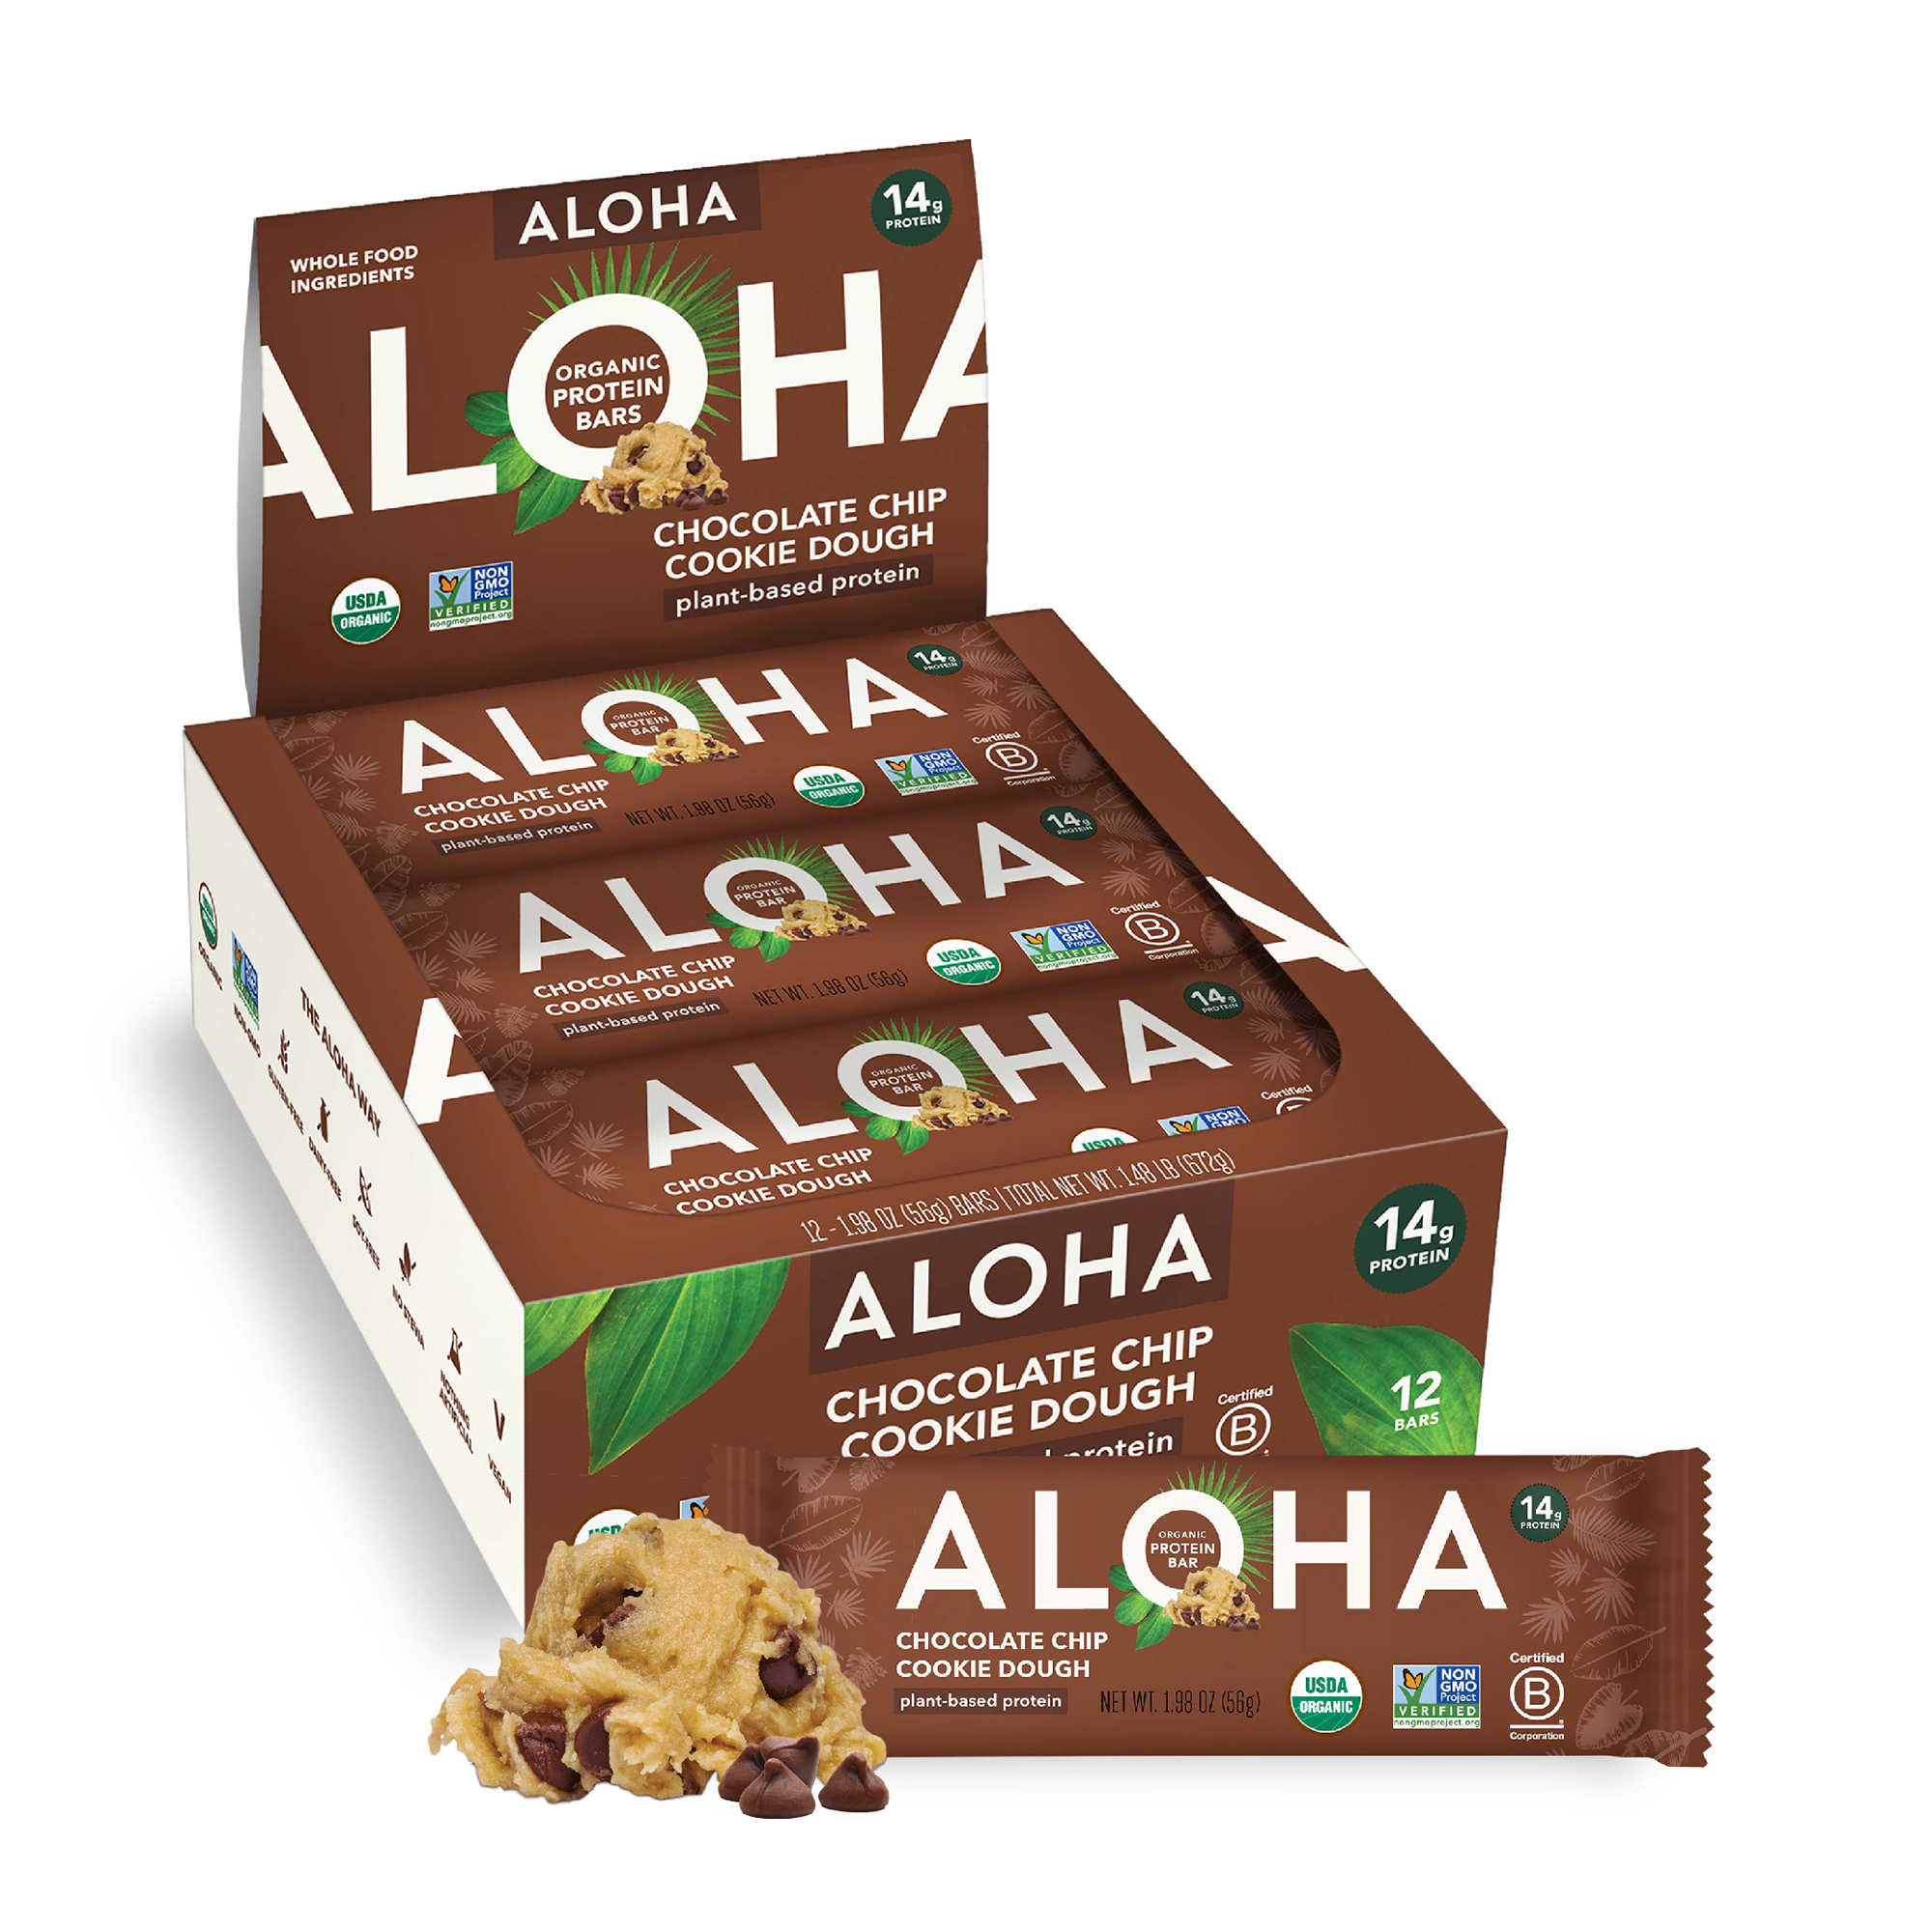 ALOHA Organic Chocolate Chip Cookie Dough, Protein Bars - 12 Pack - image 1 of 8